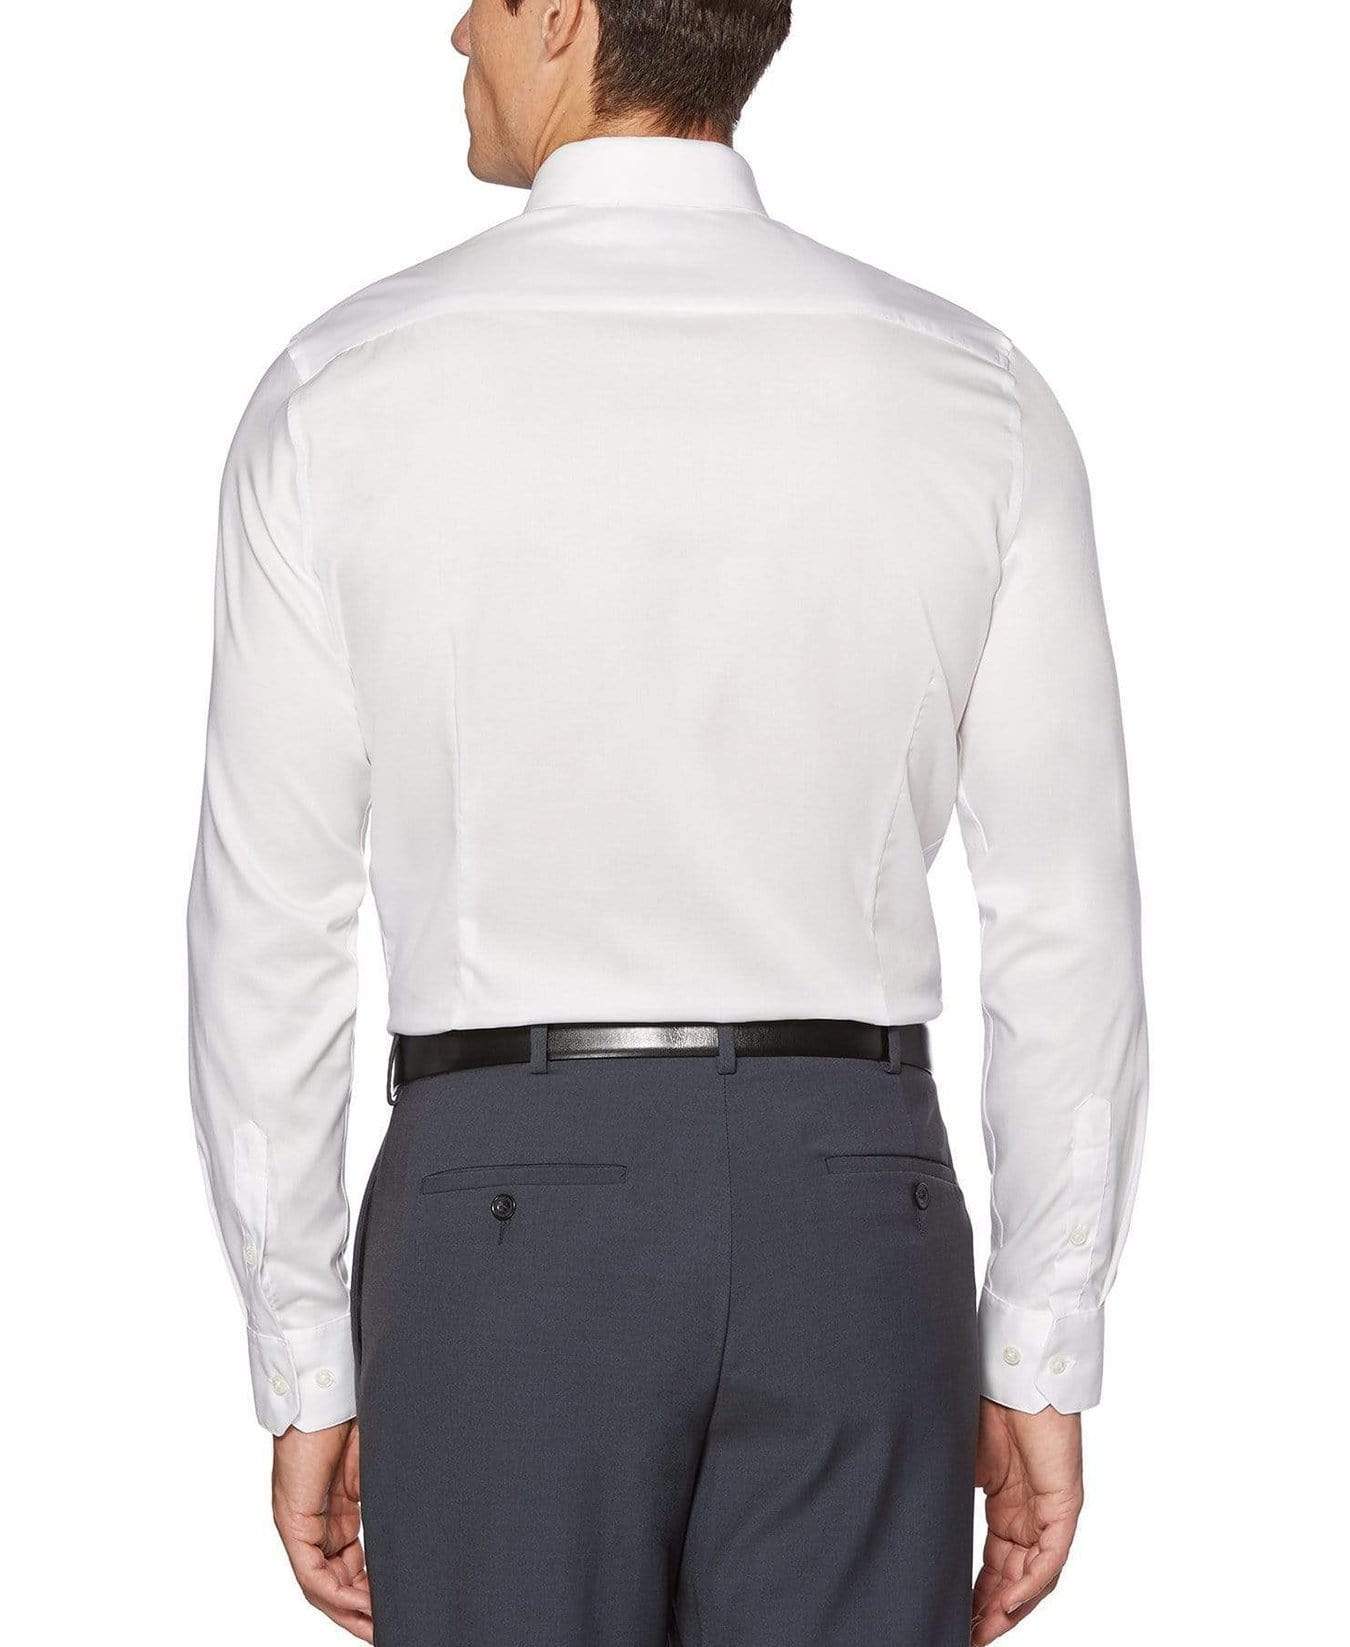 Very Slim Fit Non-Iron Solid Dress Shirt